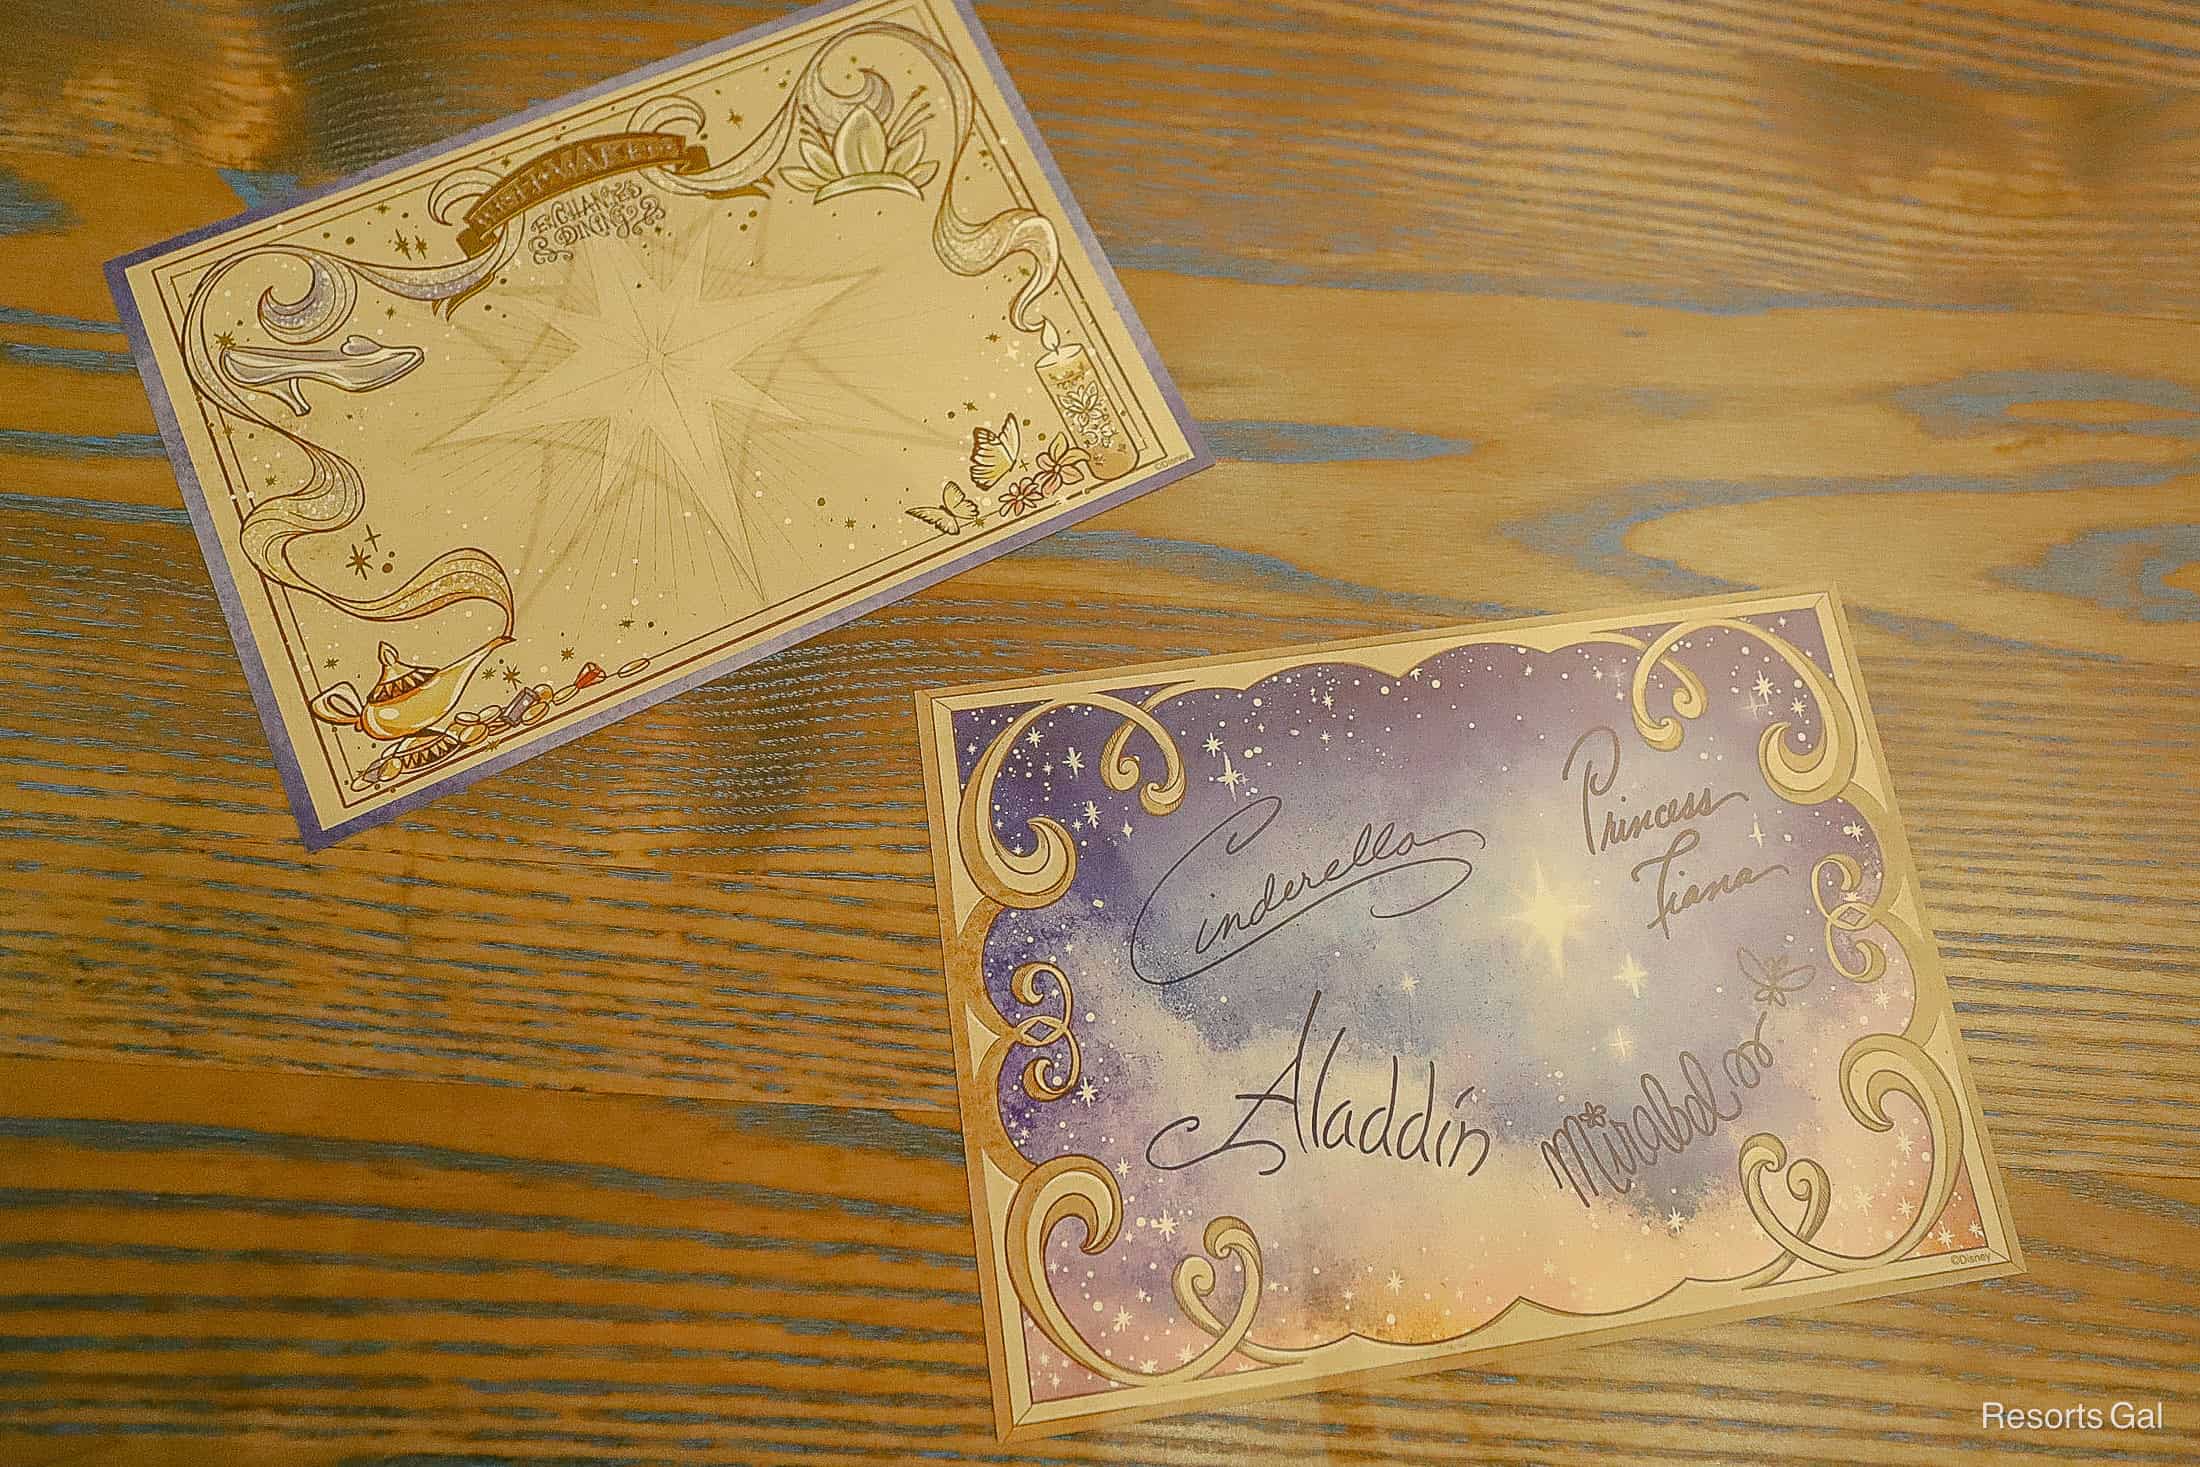 a character autograph card from 1900 Park Fare with Cinderella, Princess Tiana, Aladdin, and Mirabel's autographs